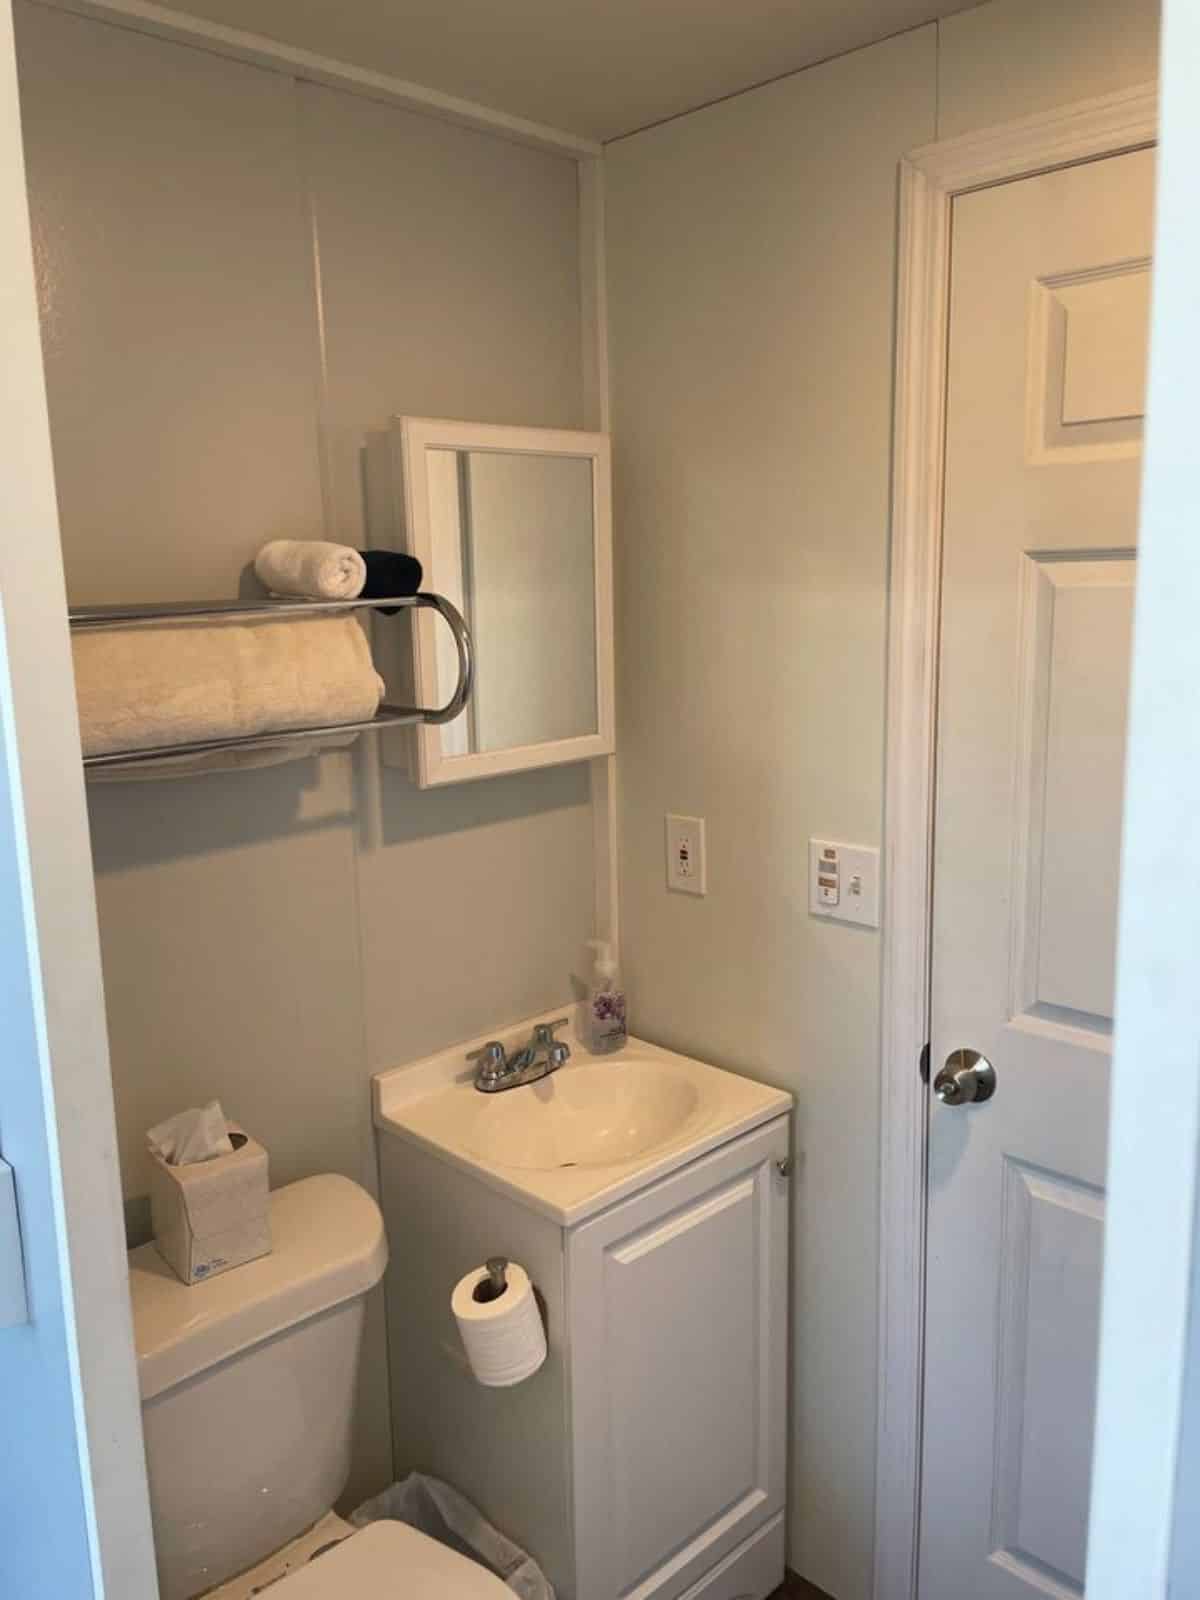 sink with vanity and mirror in the bathroom of tiny home on wheels